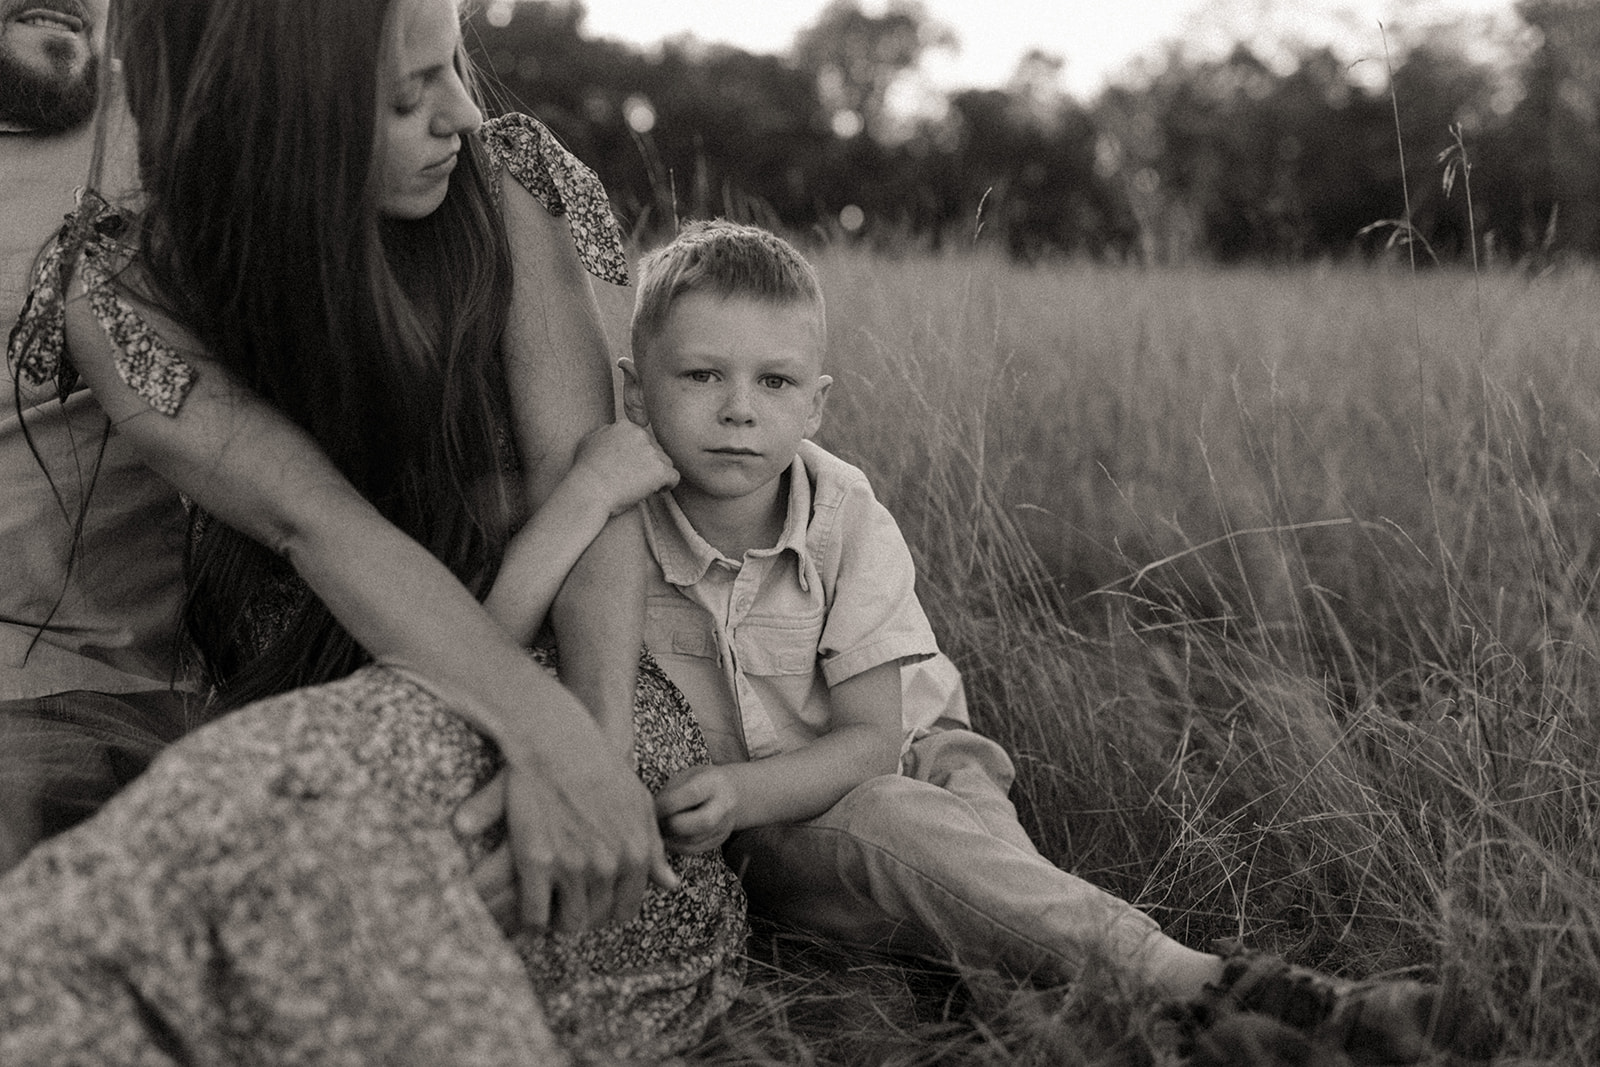 Mom and son sitting in a field at sunset